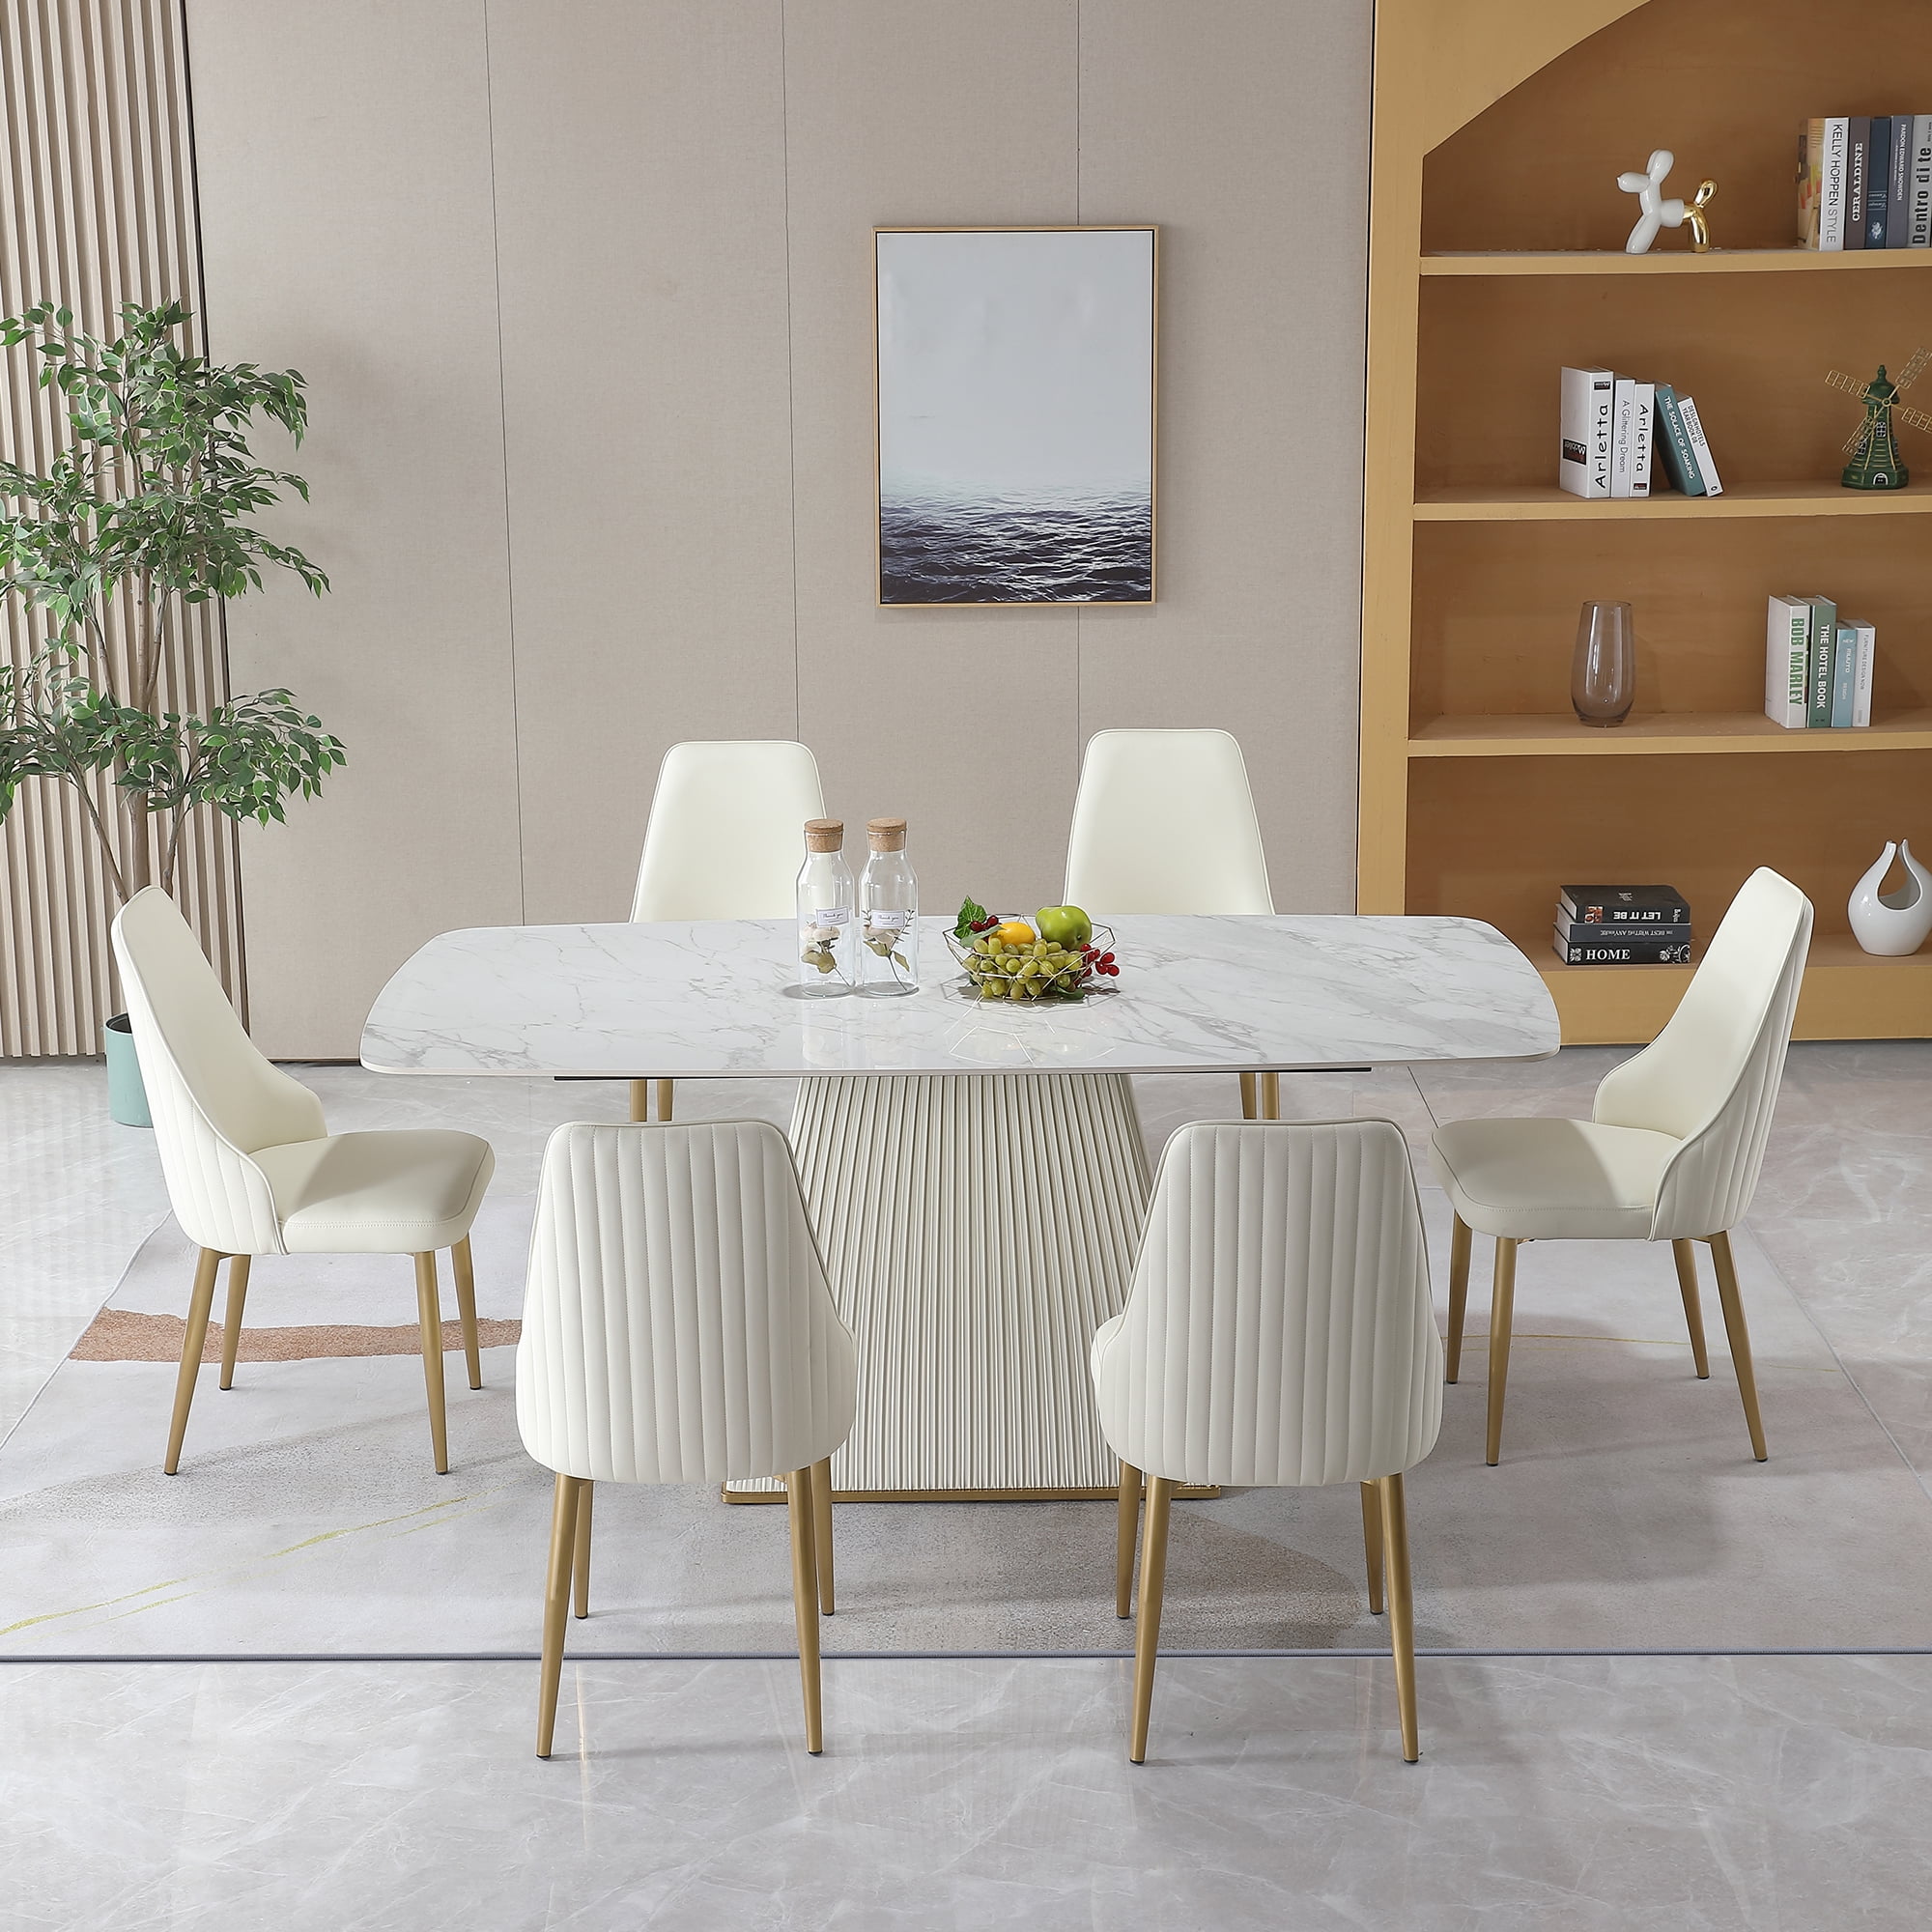 Montary 7 Piece Dining Room Set, Modern Dining Table and Chairs